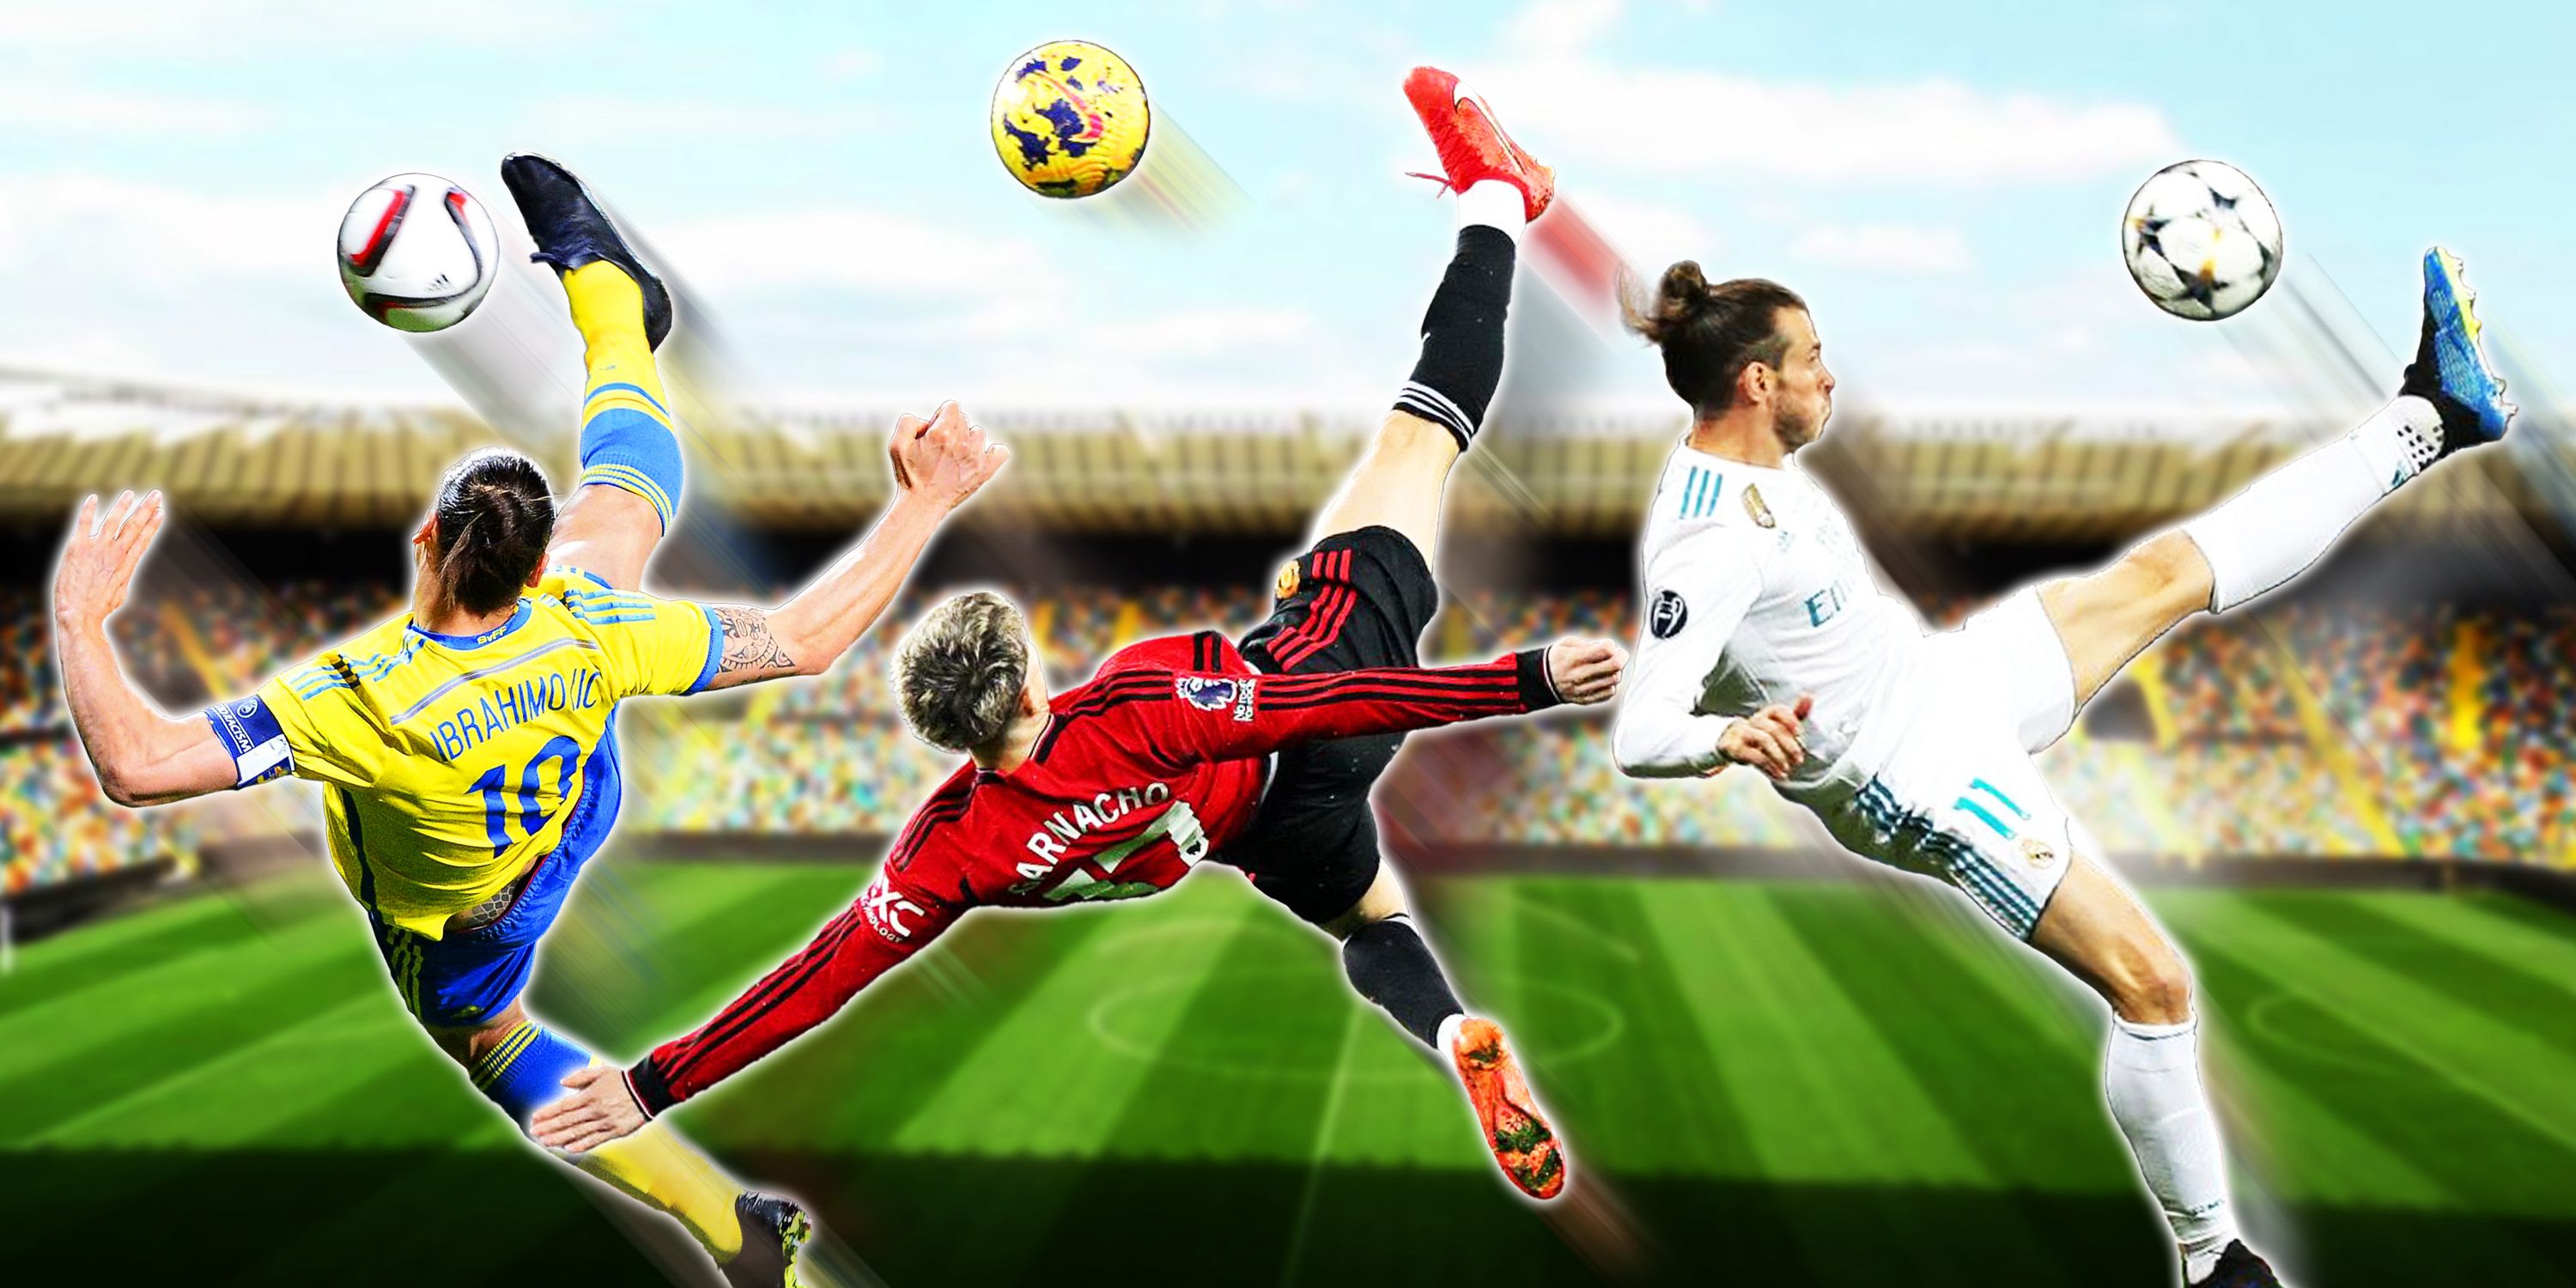 A collage of bicycle kicks in football.